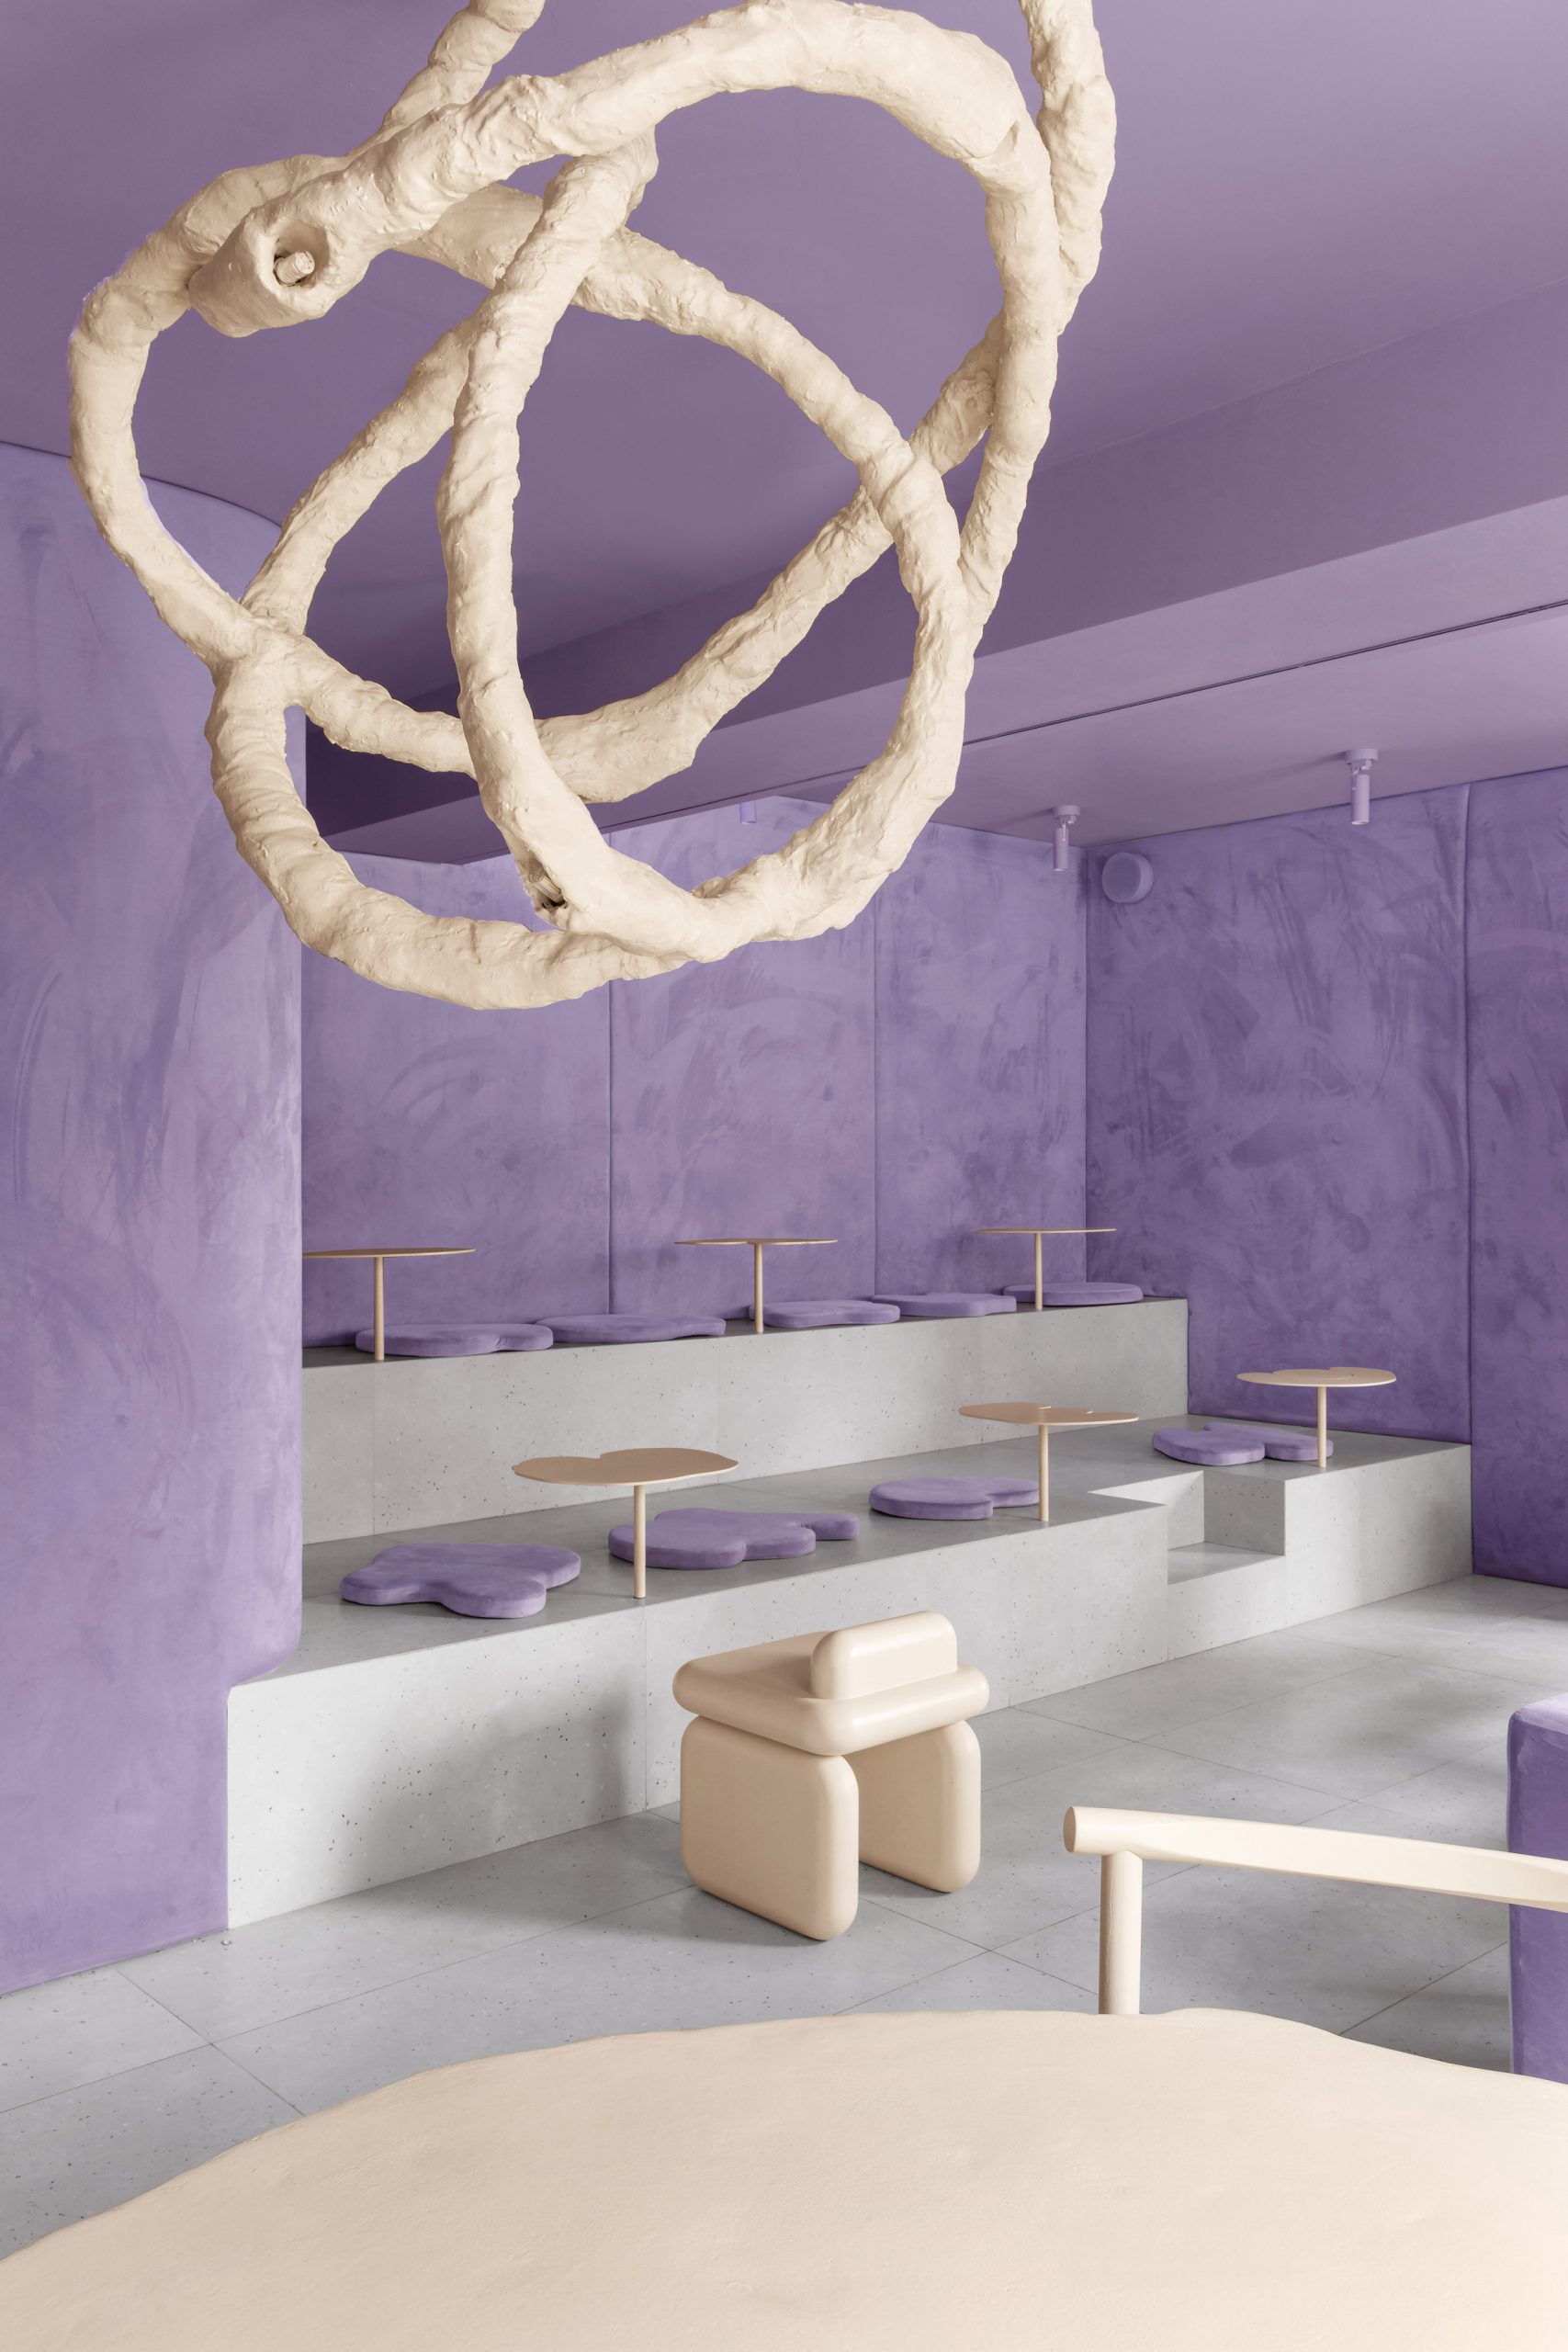 Chandelier and velvet walls in doughnut-themed cafe in Russia